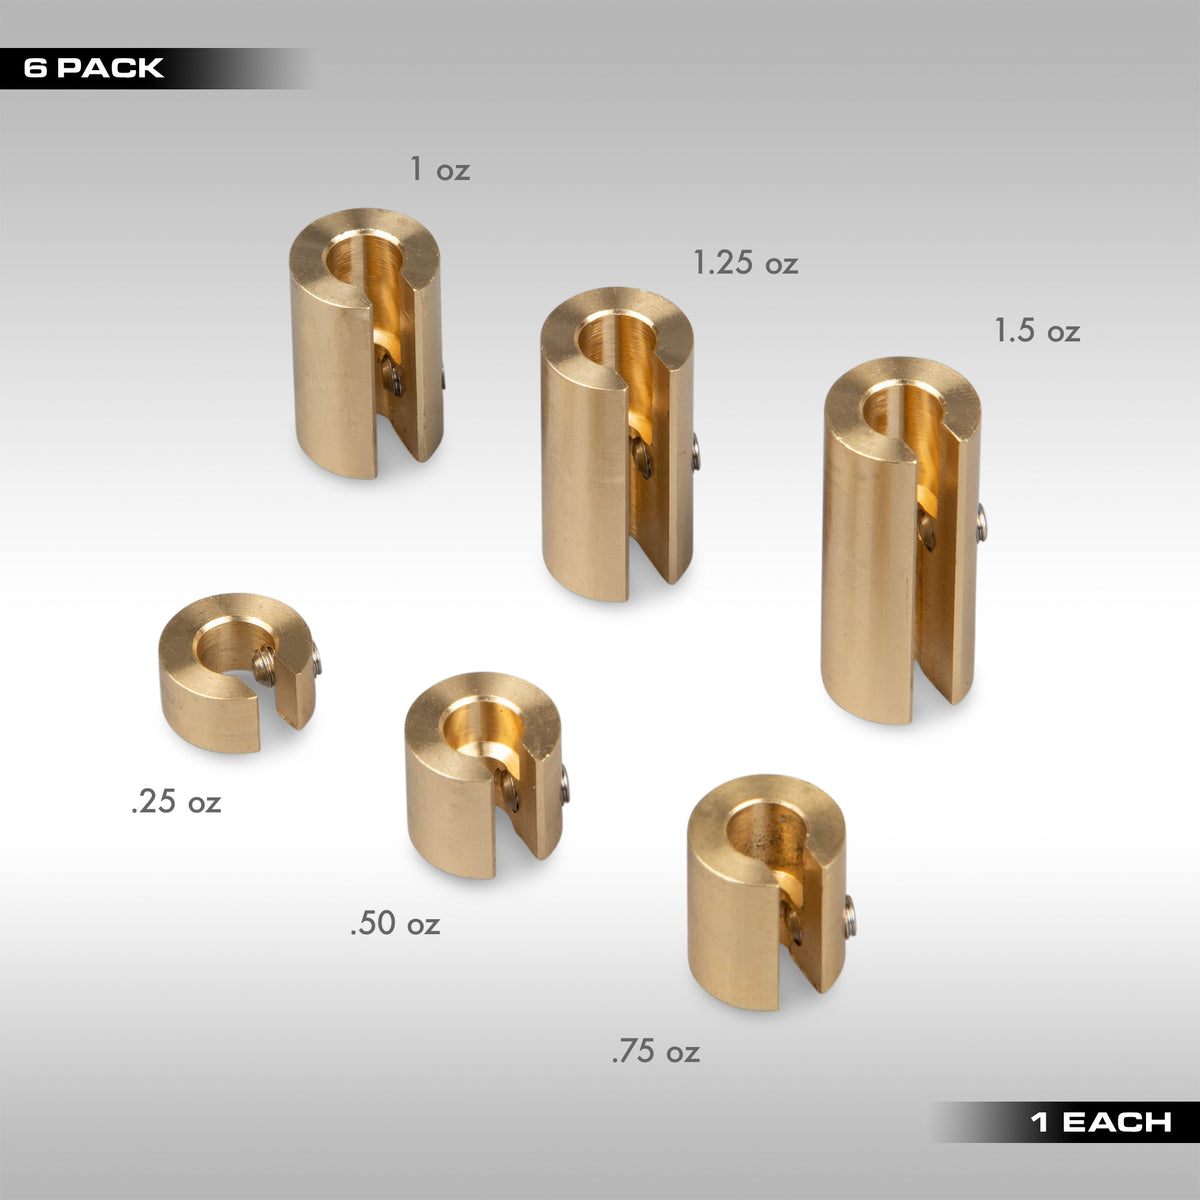 6 pack assortment with 1 of each size No-Mar wheel weights for balancing your motorcycle wheels. Machined brass weights are designed to lock onto the spokes with a set screw letting you get the perfect balance for your wheels. No Mar motorcycle wheel weights.